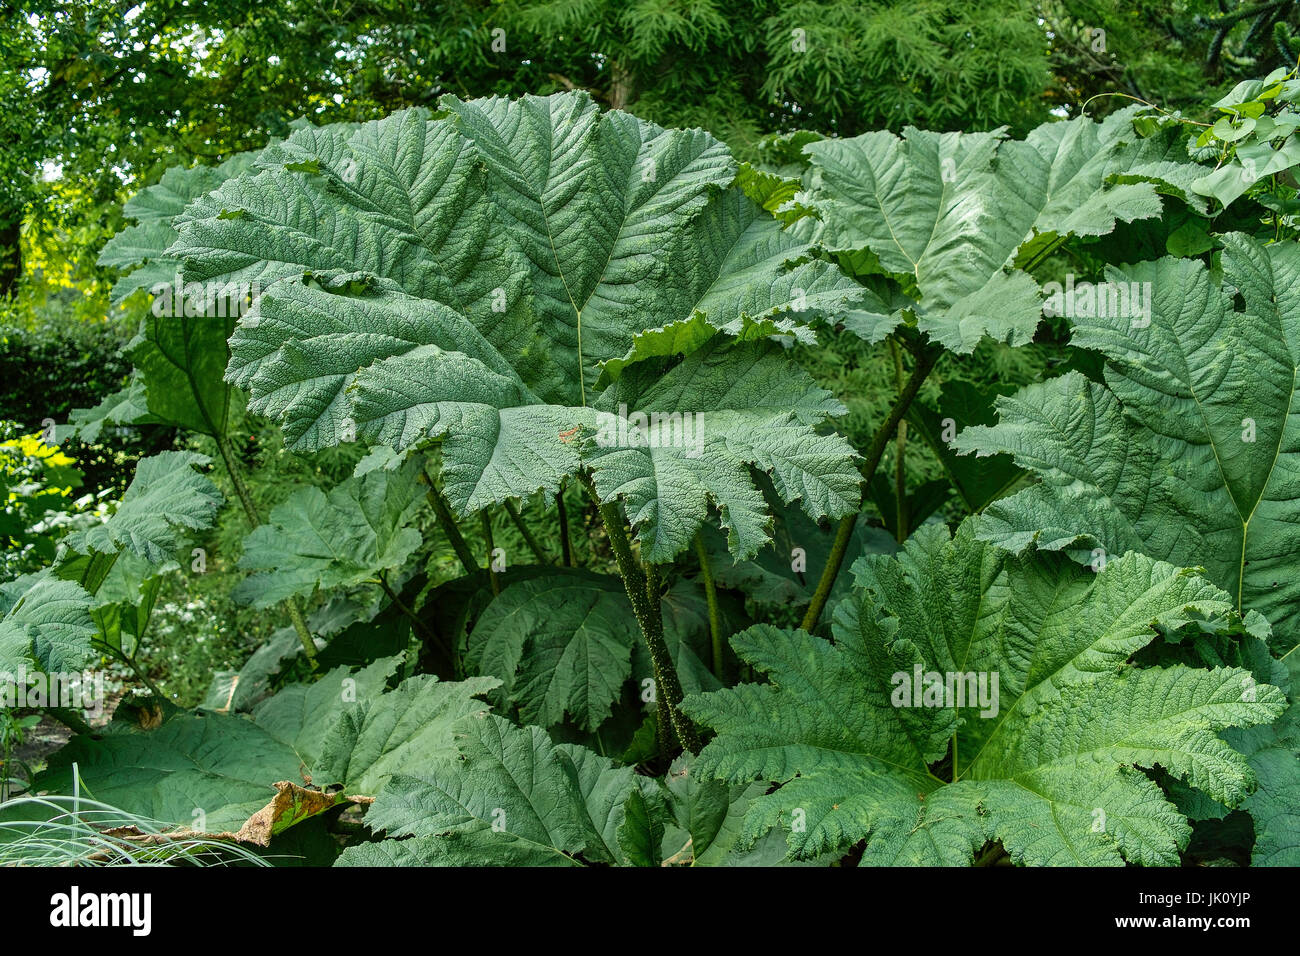 wide sheets of a MAMMOTH'S SHEET. big leaves of the GUNNERA., grossflaechige blaetter eines MAMMUTBLATTS. big leaves of the GUNNERA. Stock Photo